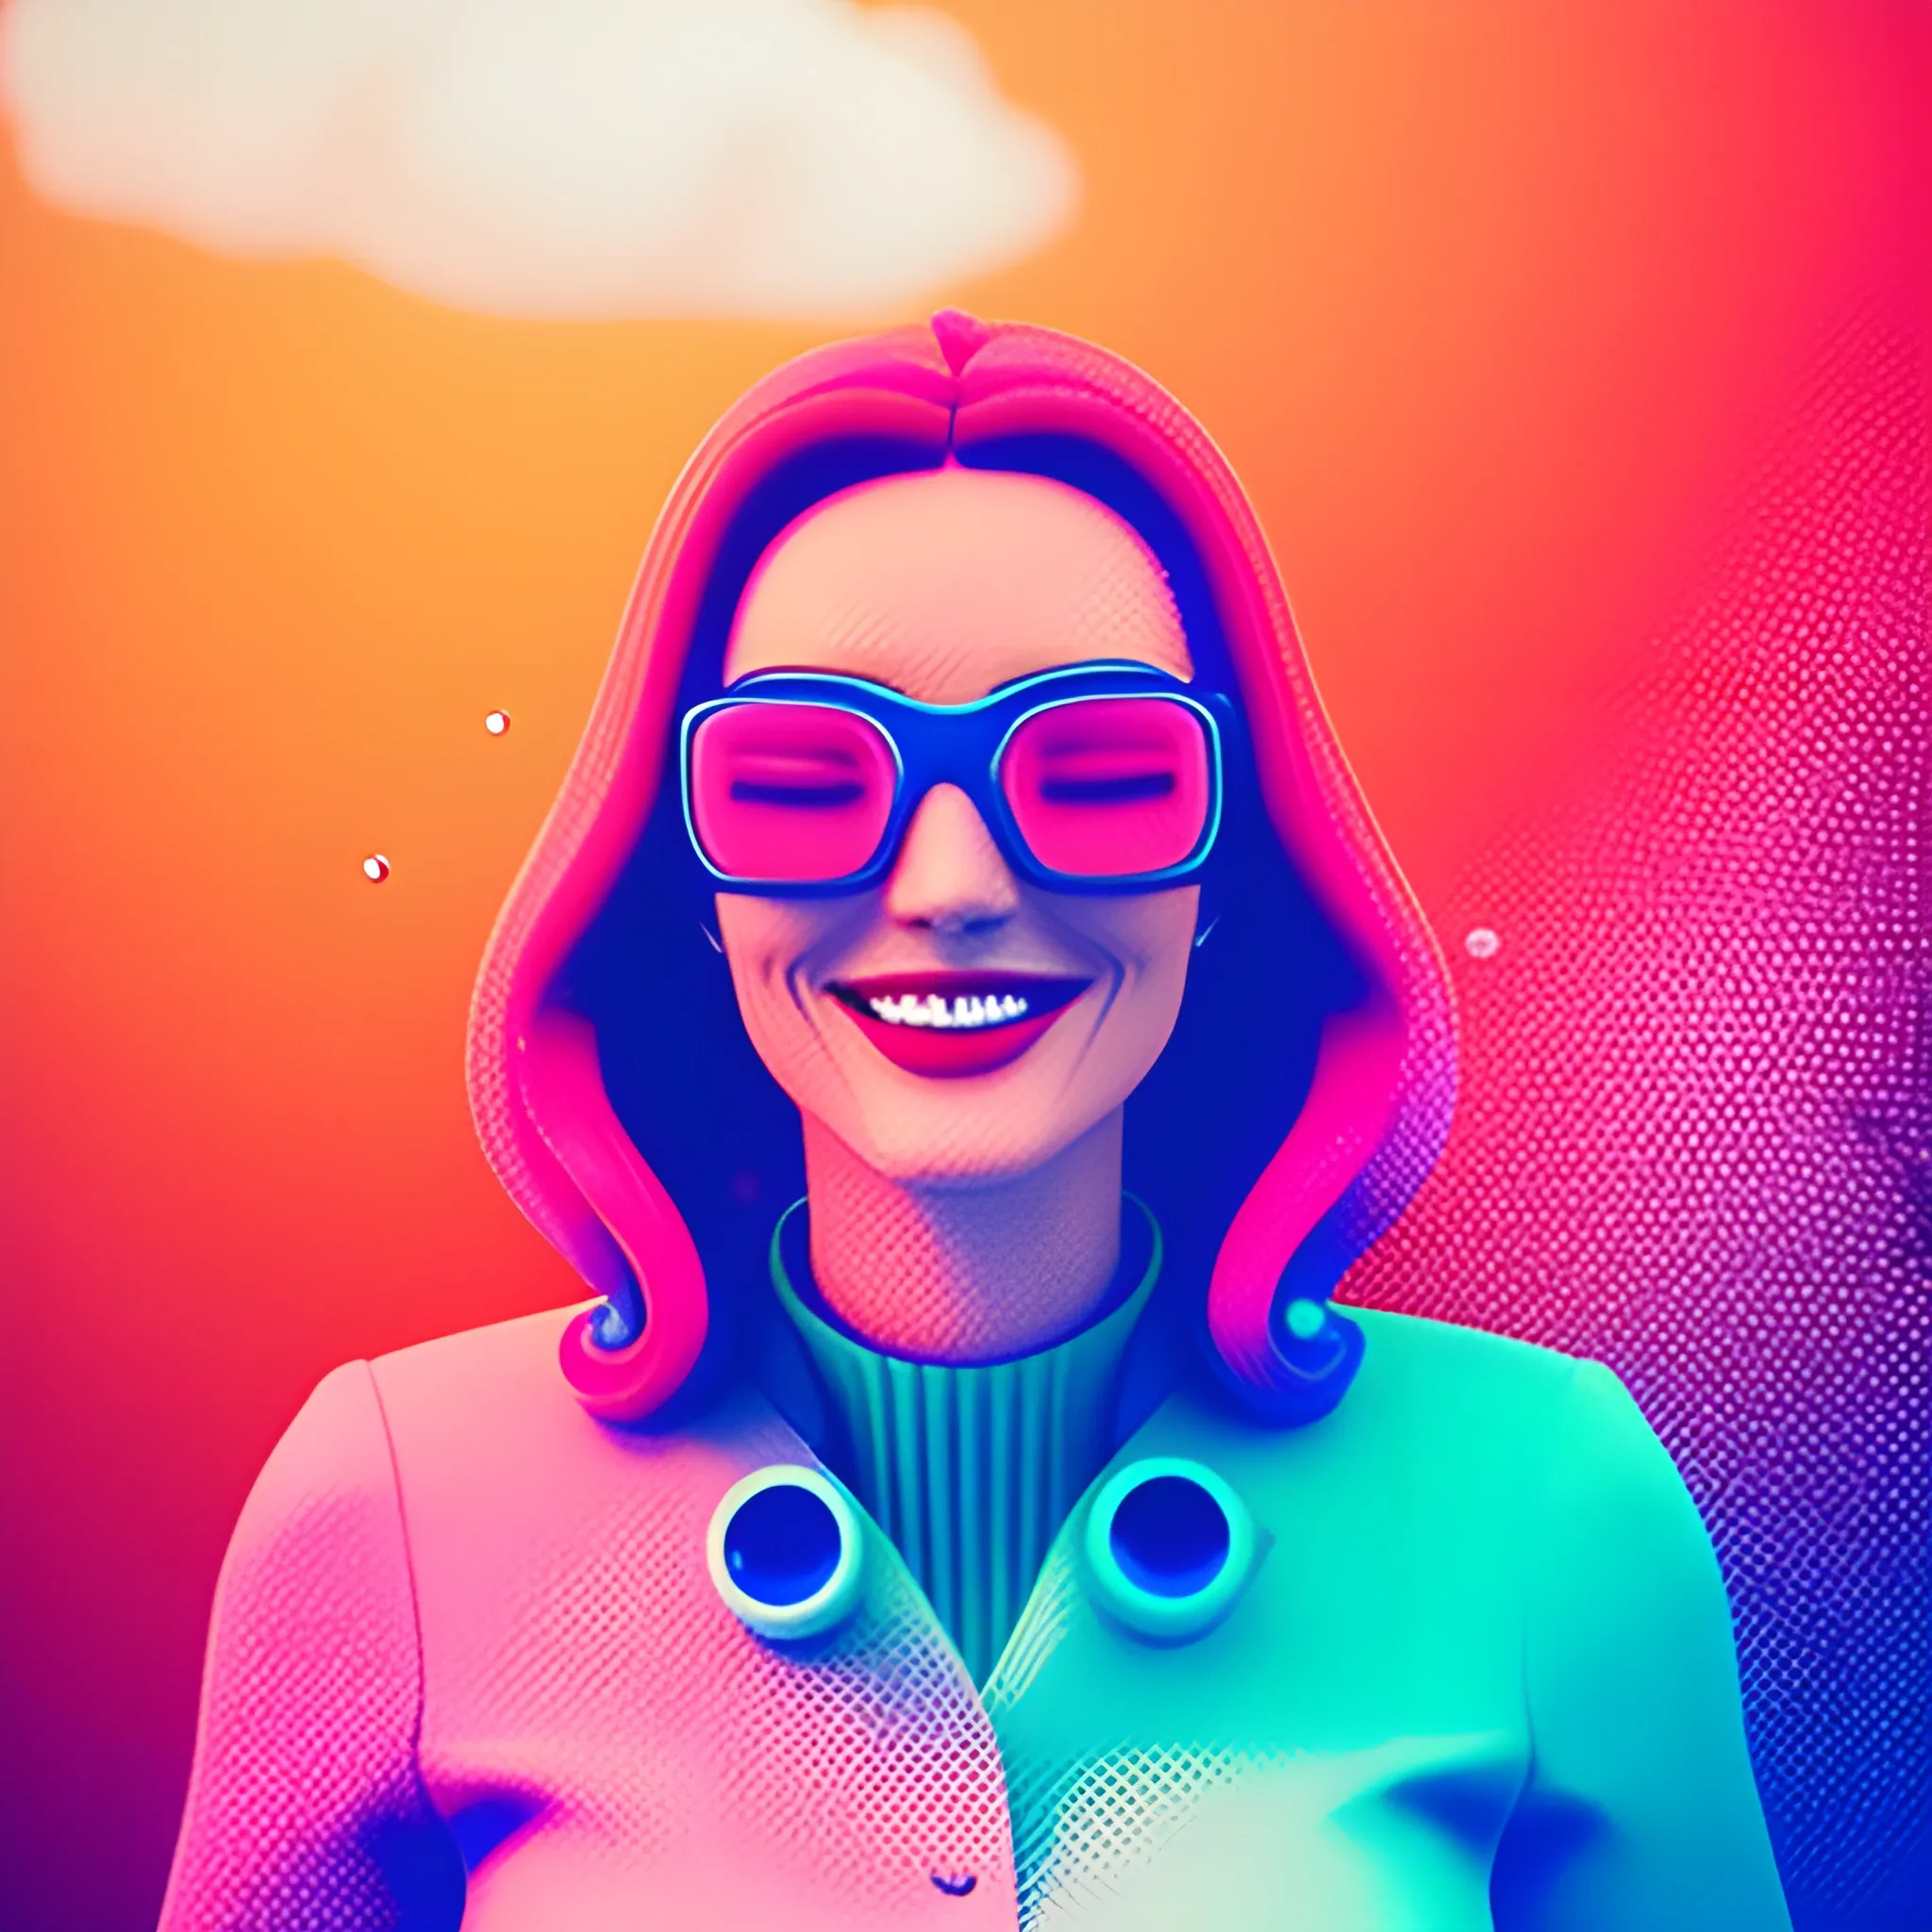 Friendly wise young high-tech female government worker. Should be warm, cheerful, knowledgeable, and smiling.  underwater bubbly psychedelic clouds, Anaglyph 3D lens blur effect
